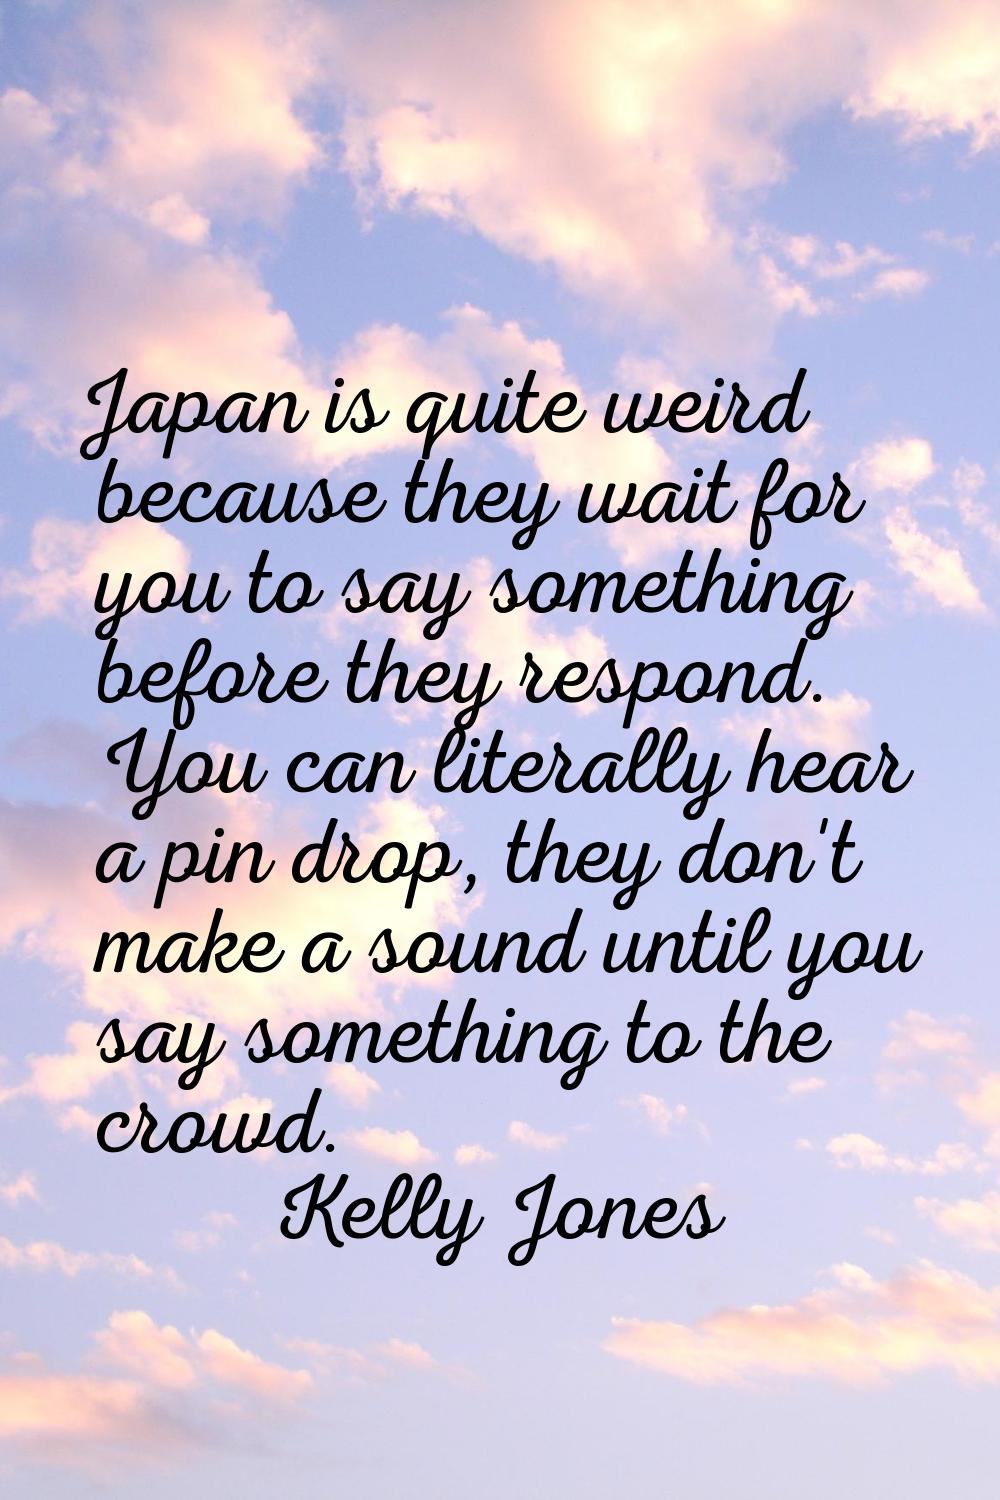 Japan is quite weird because they wait for you to say something before they respond. You can litera